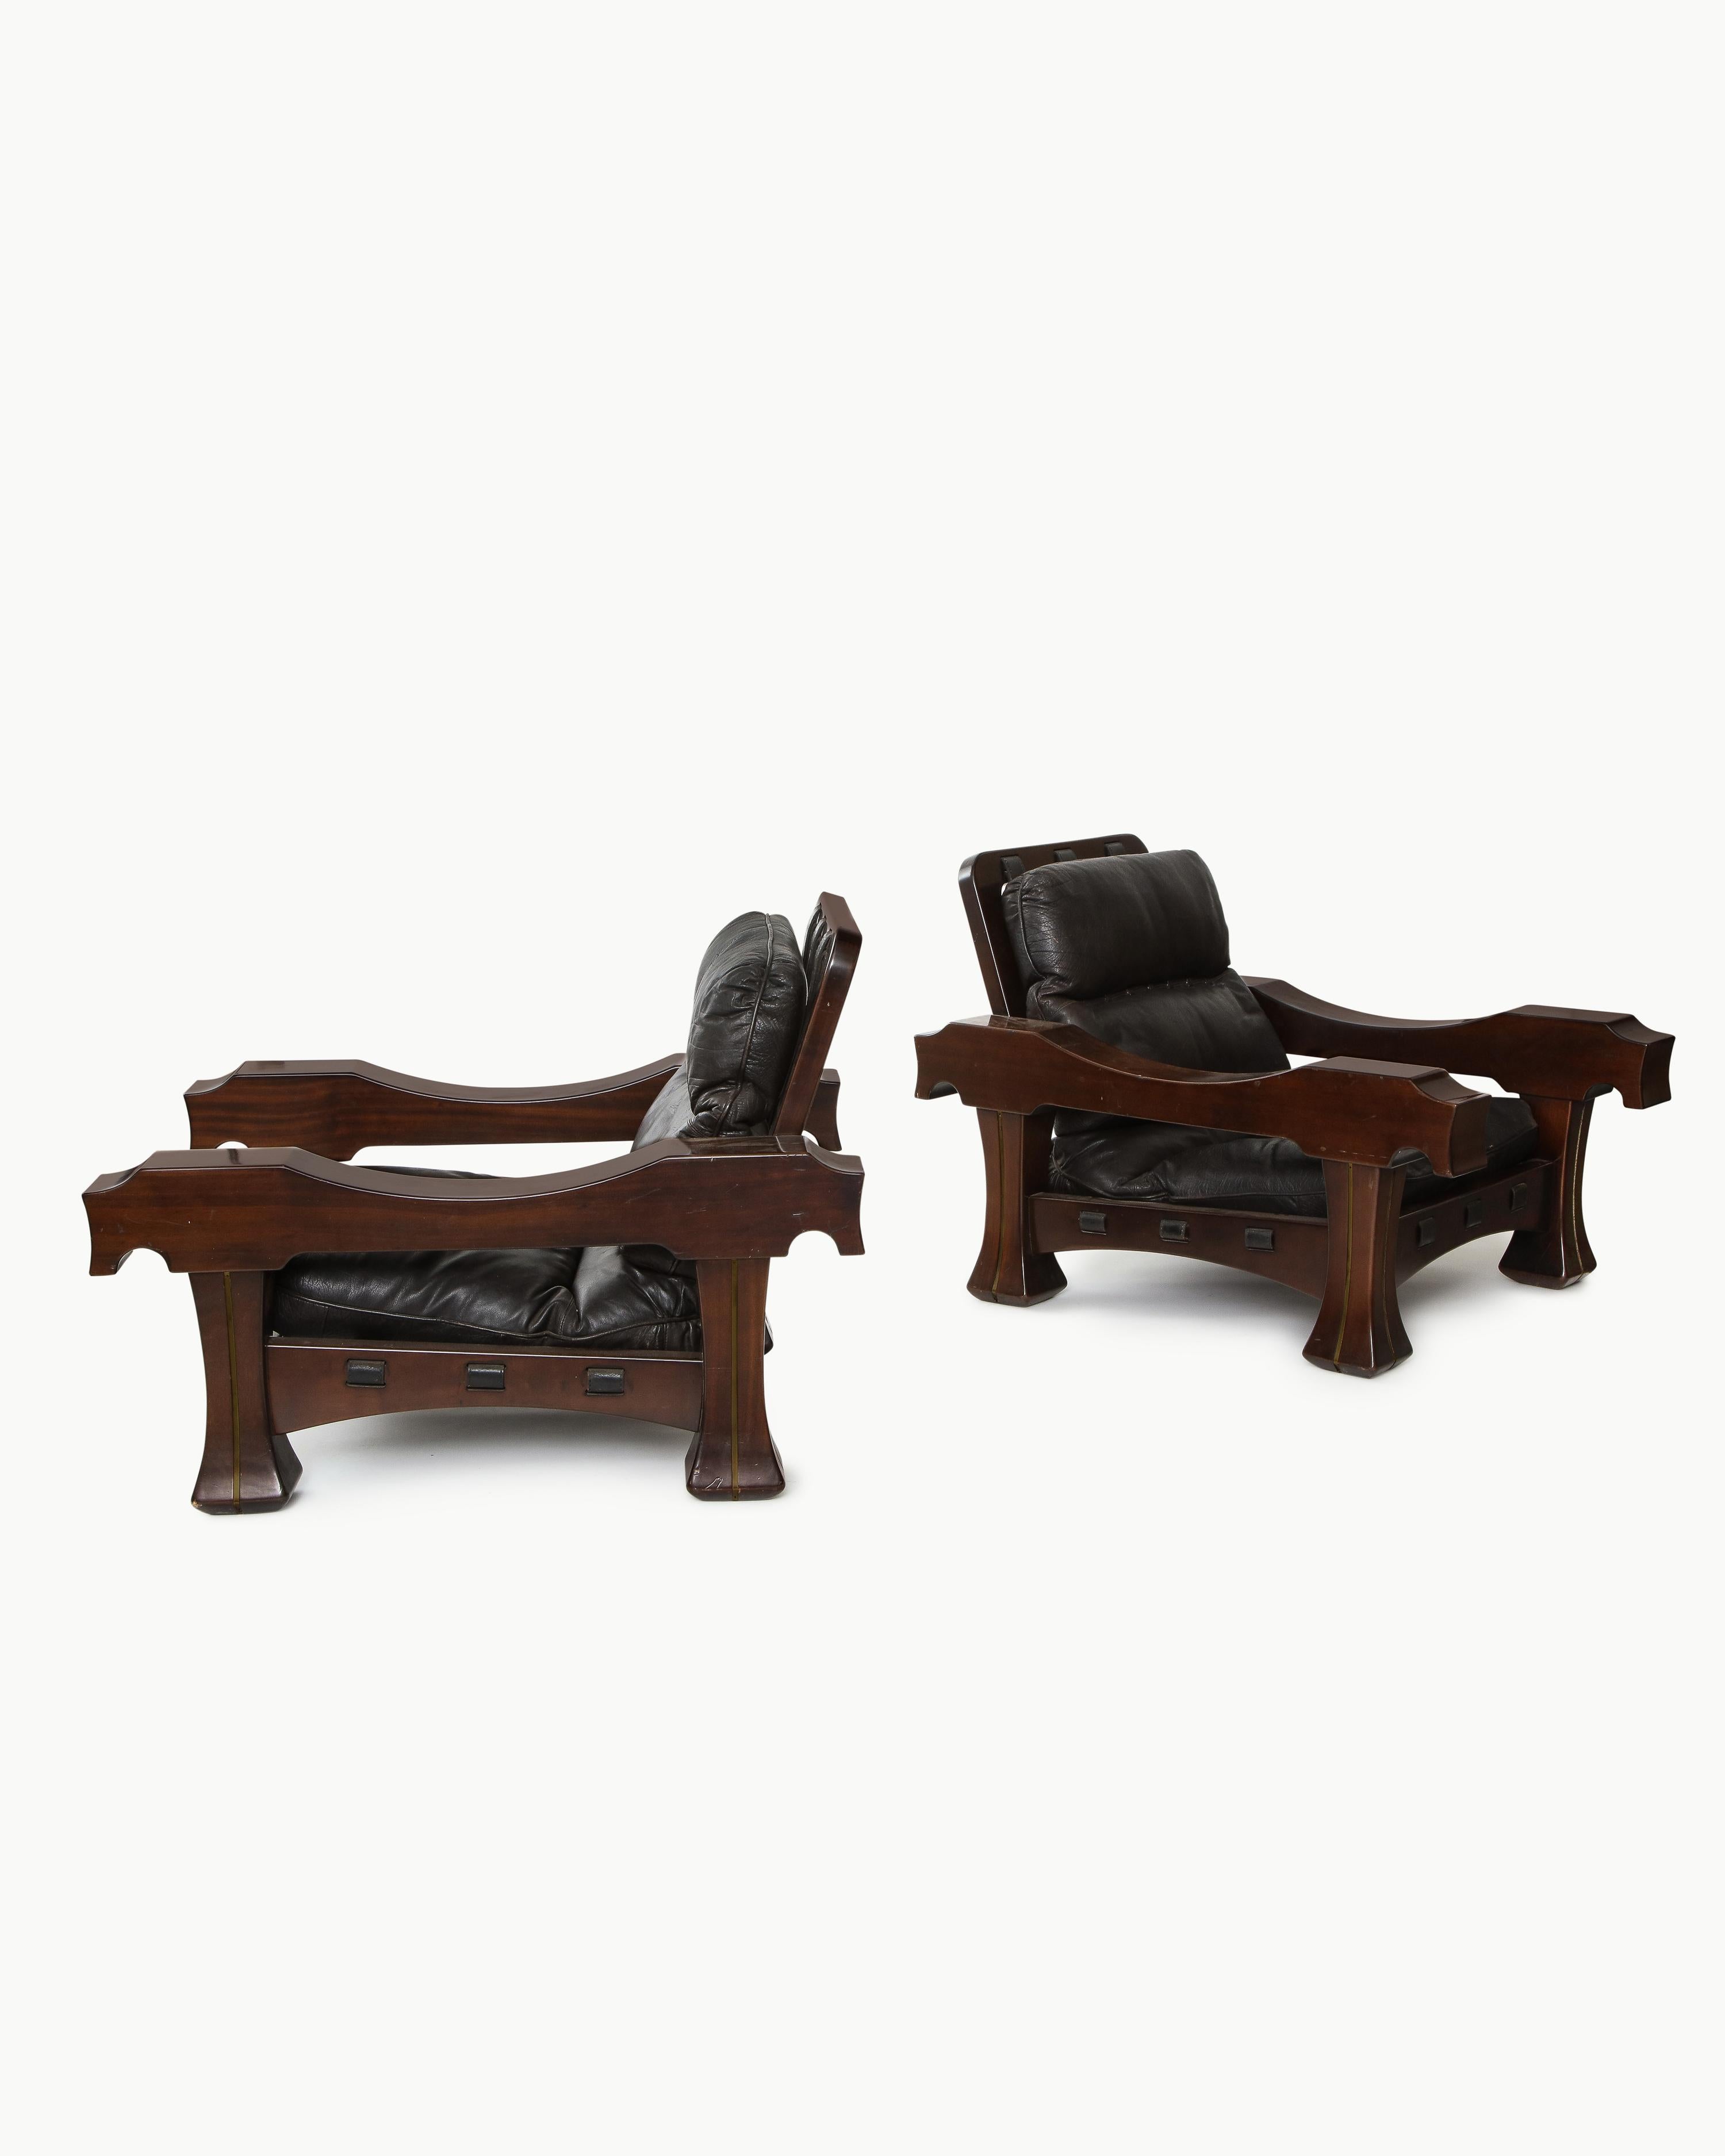 Massive pair of Ussaro armchairs by Luciano Frigerio in tropical wood, black leather and brass. These chairs embody the solid and sturdy masculine style emblematic of Frigerio's designs. The mixed media construction of these unique models enhance